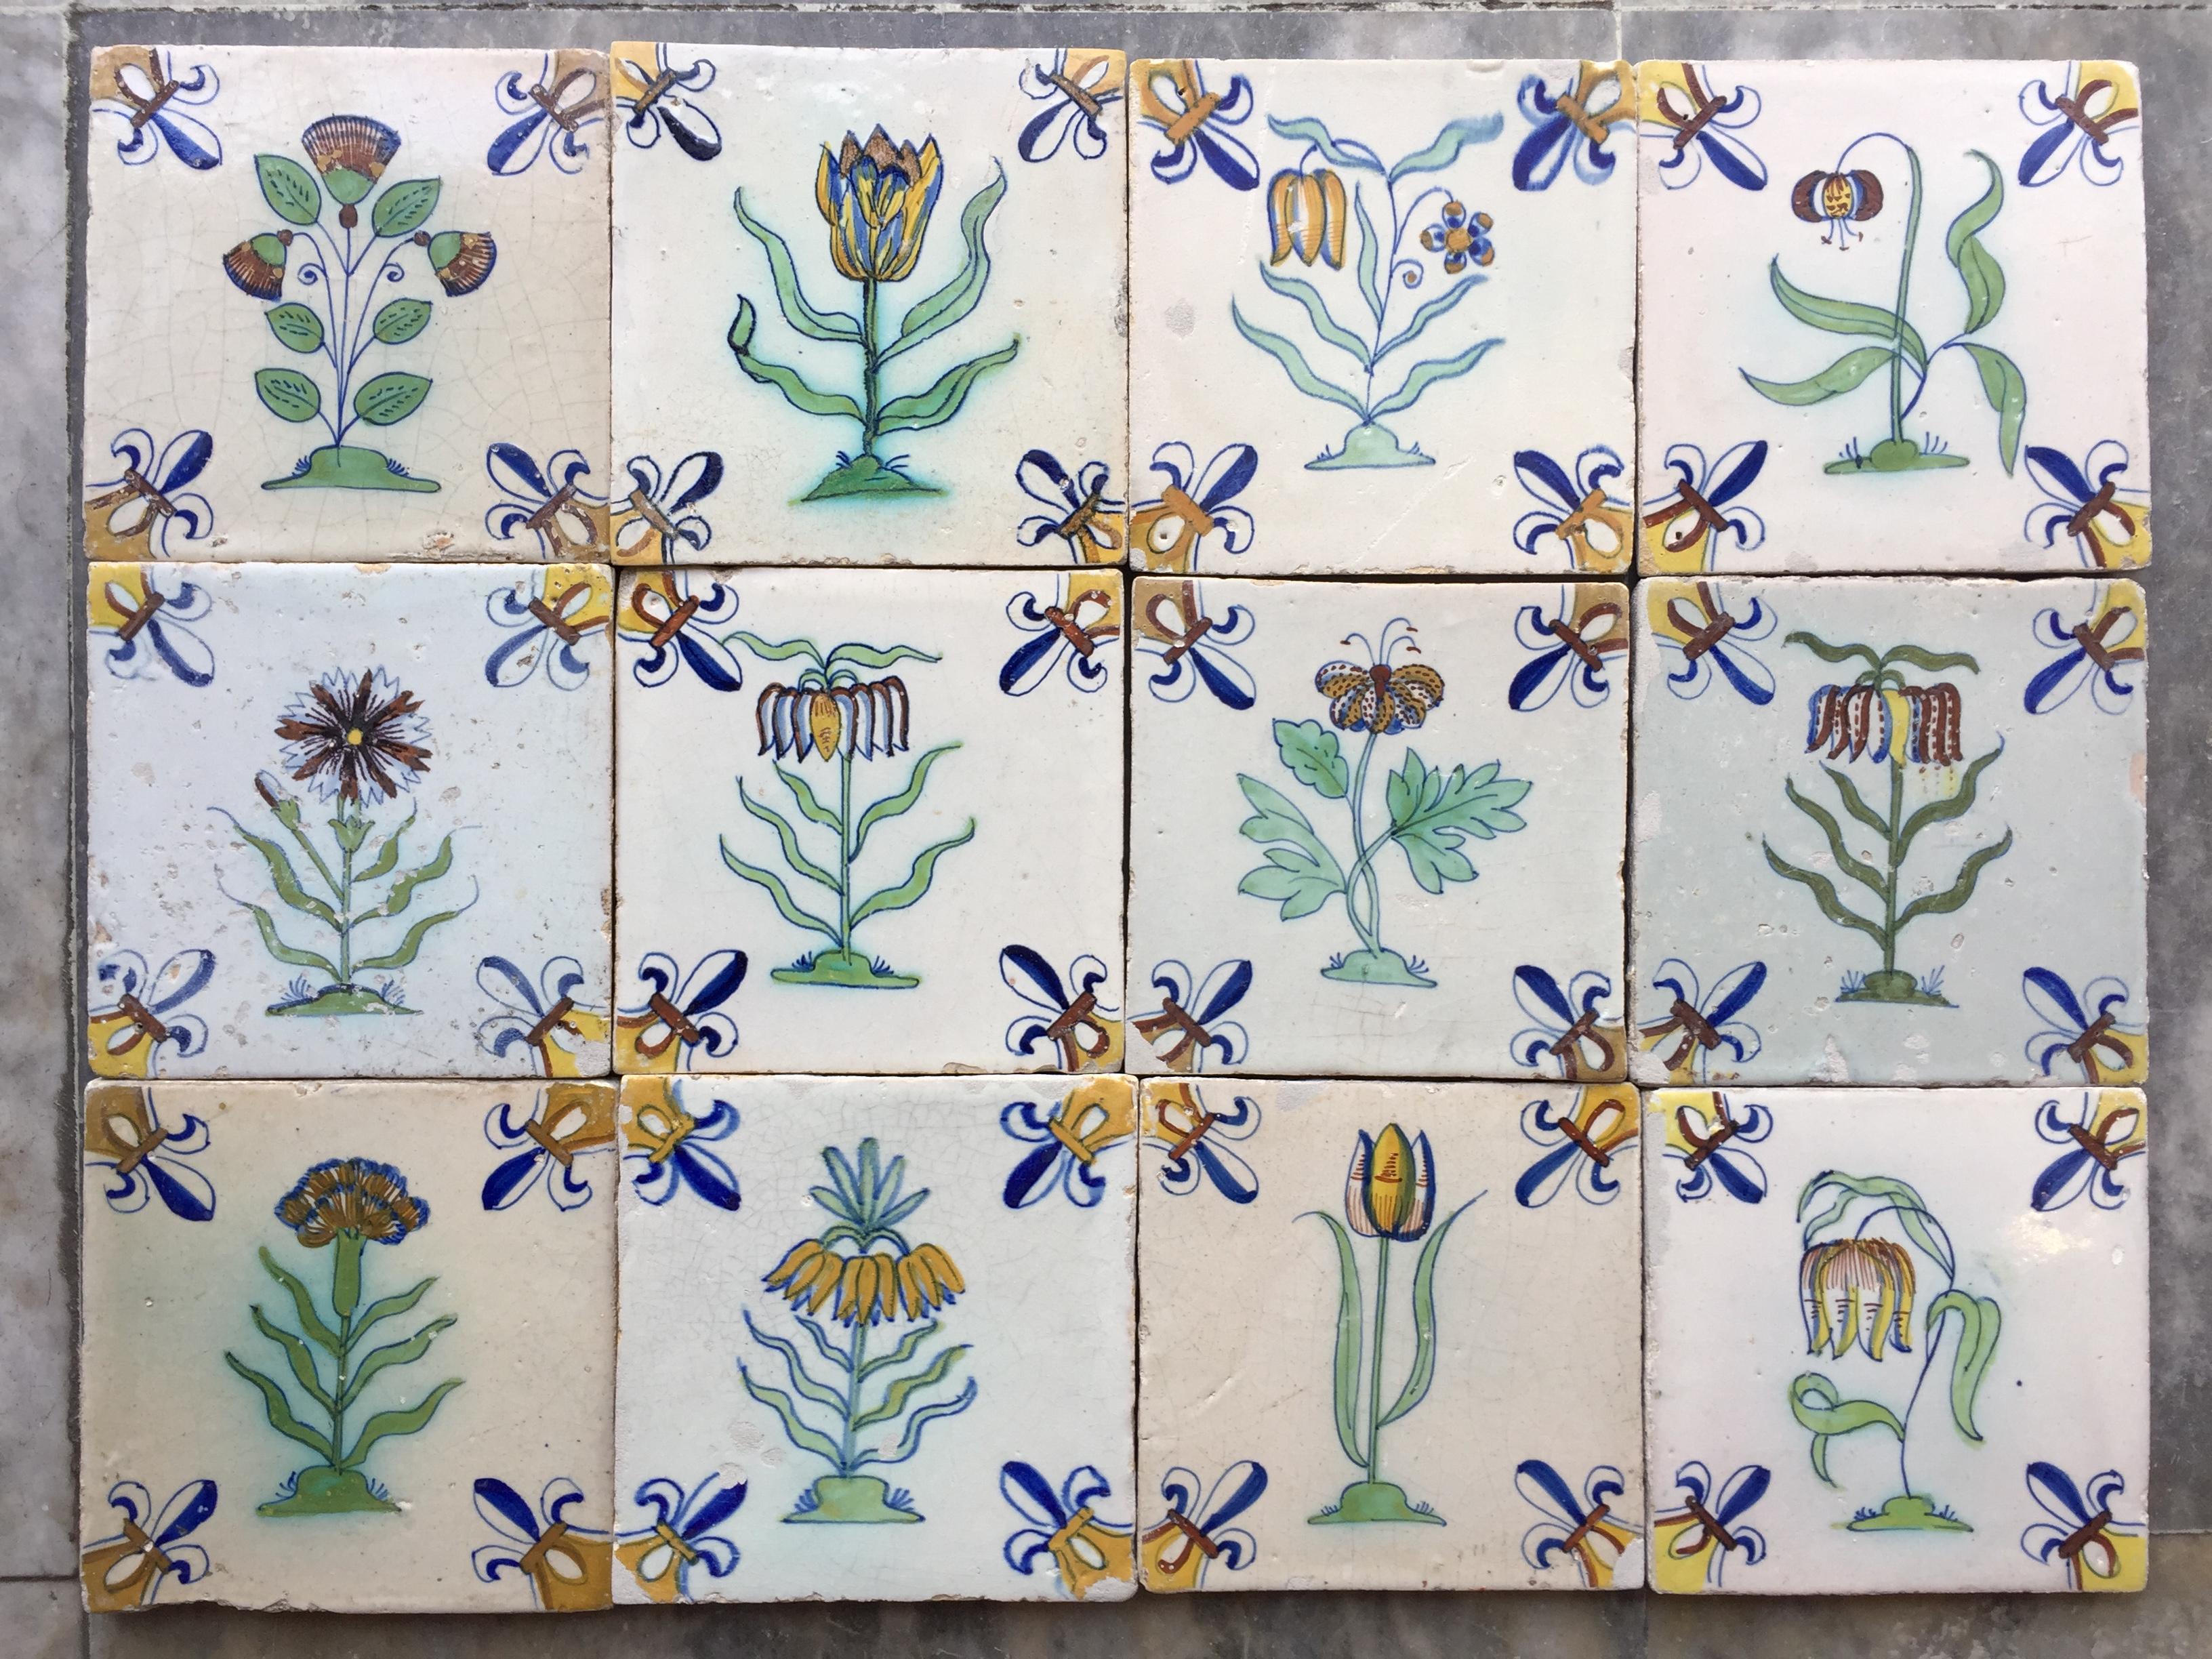 A rare set of 12 polychrome Dutch Delft tiles with flowers.
Made in The Netherlands.
Circa 1625 - 1650.

This set of tiles is of very fine quality and has a bright glaze. They date to the second quarter of the 17th century and where probably ment to